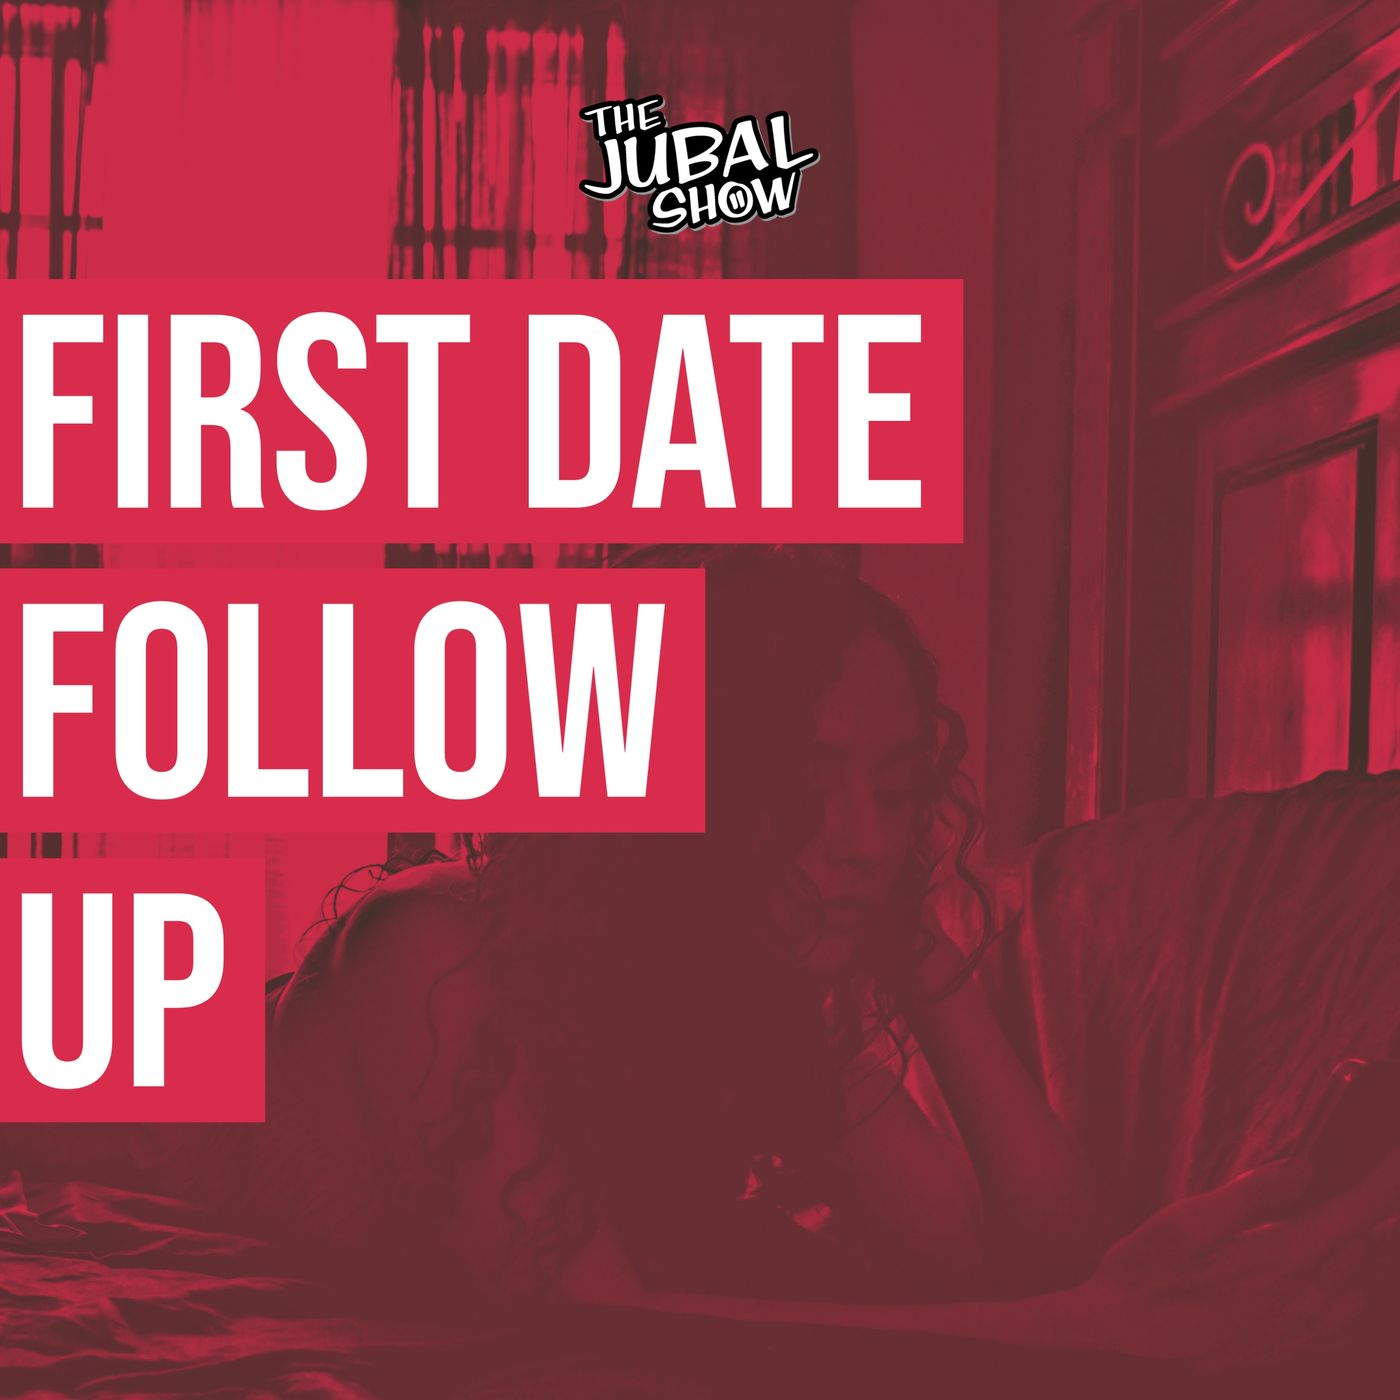 This First Date Follow Up is the firsts set-up on The Jubal Show!